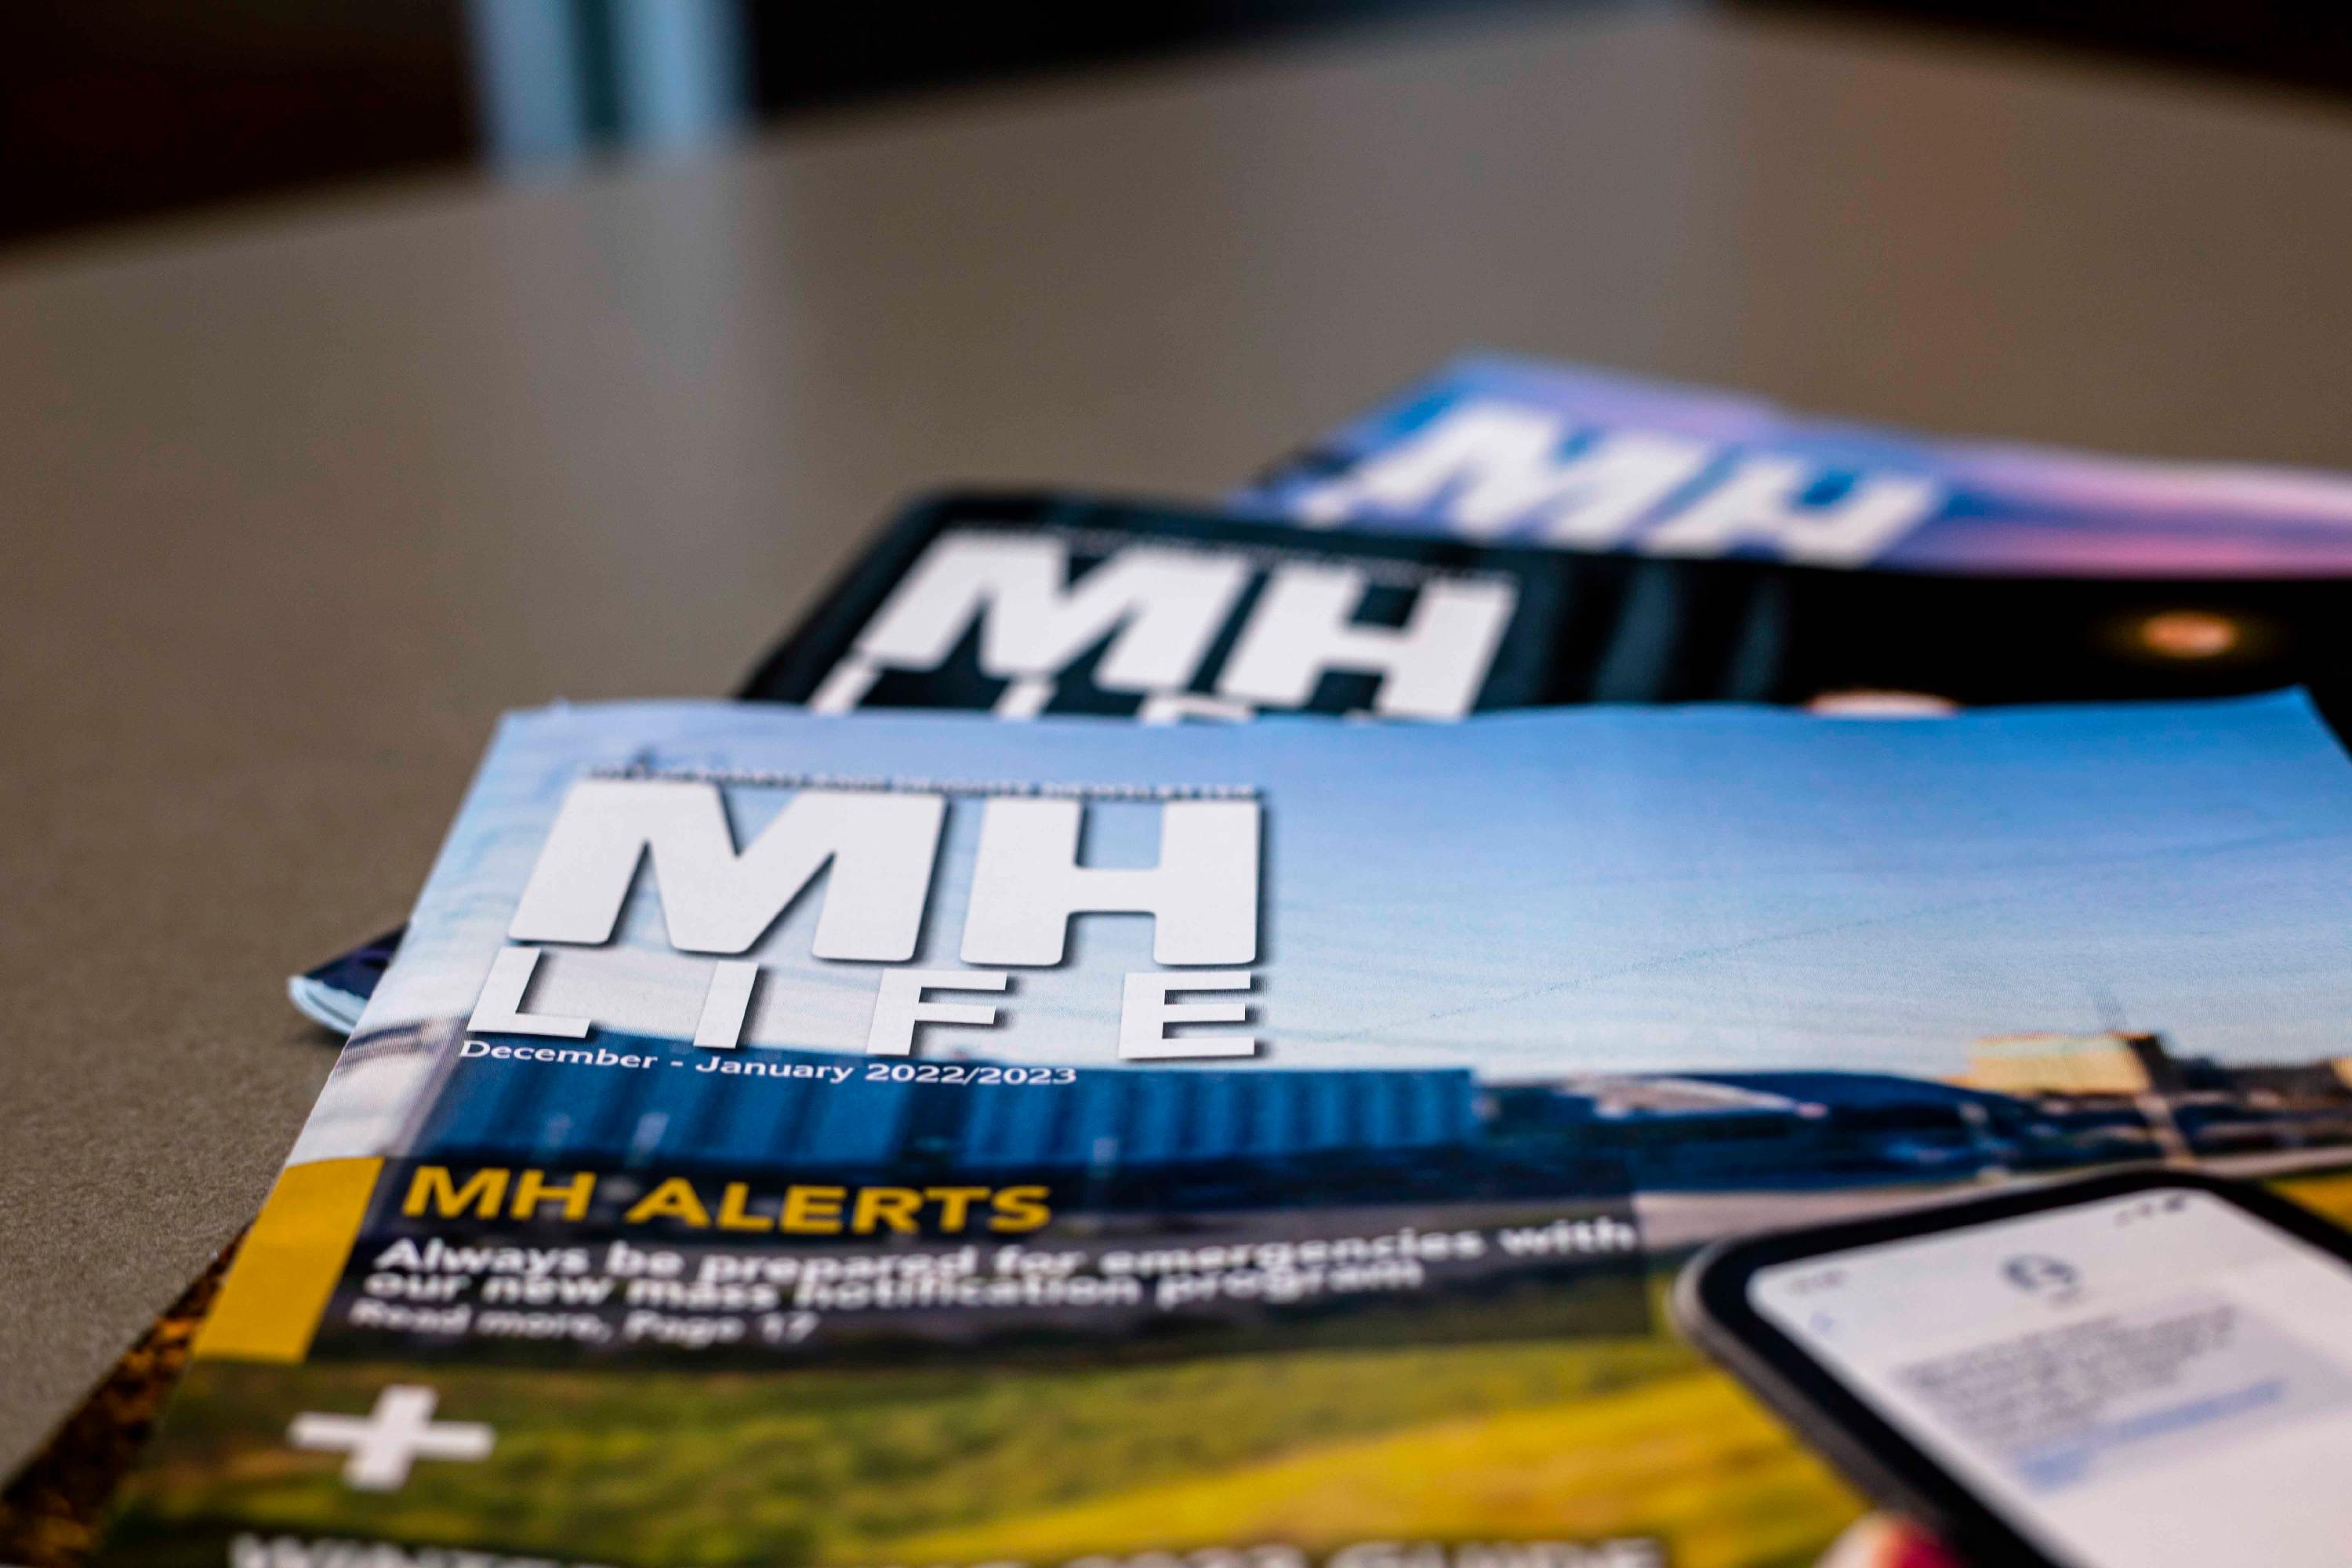 3 MH Life Newsletters stack on top of each other, with the MH Life Logo visible on the top right corner of each publication